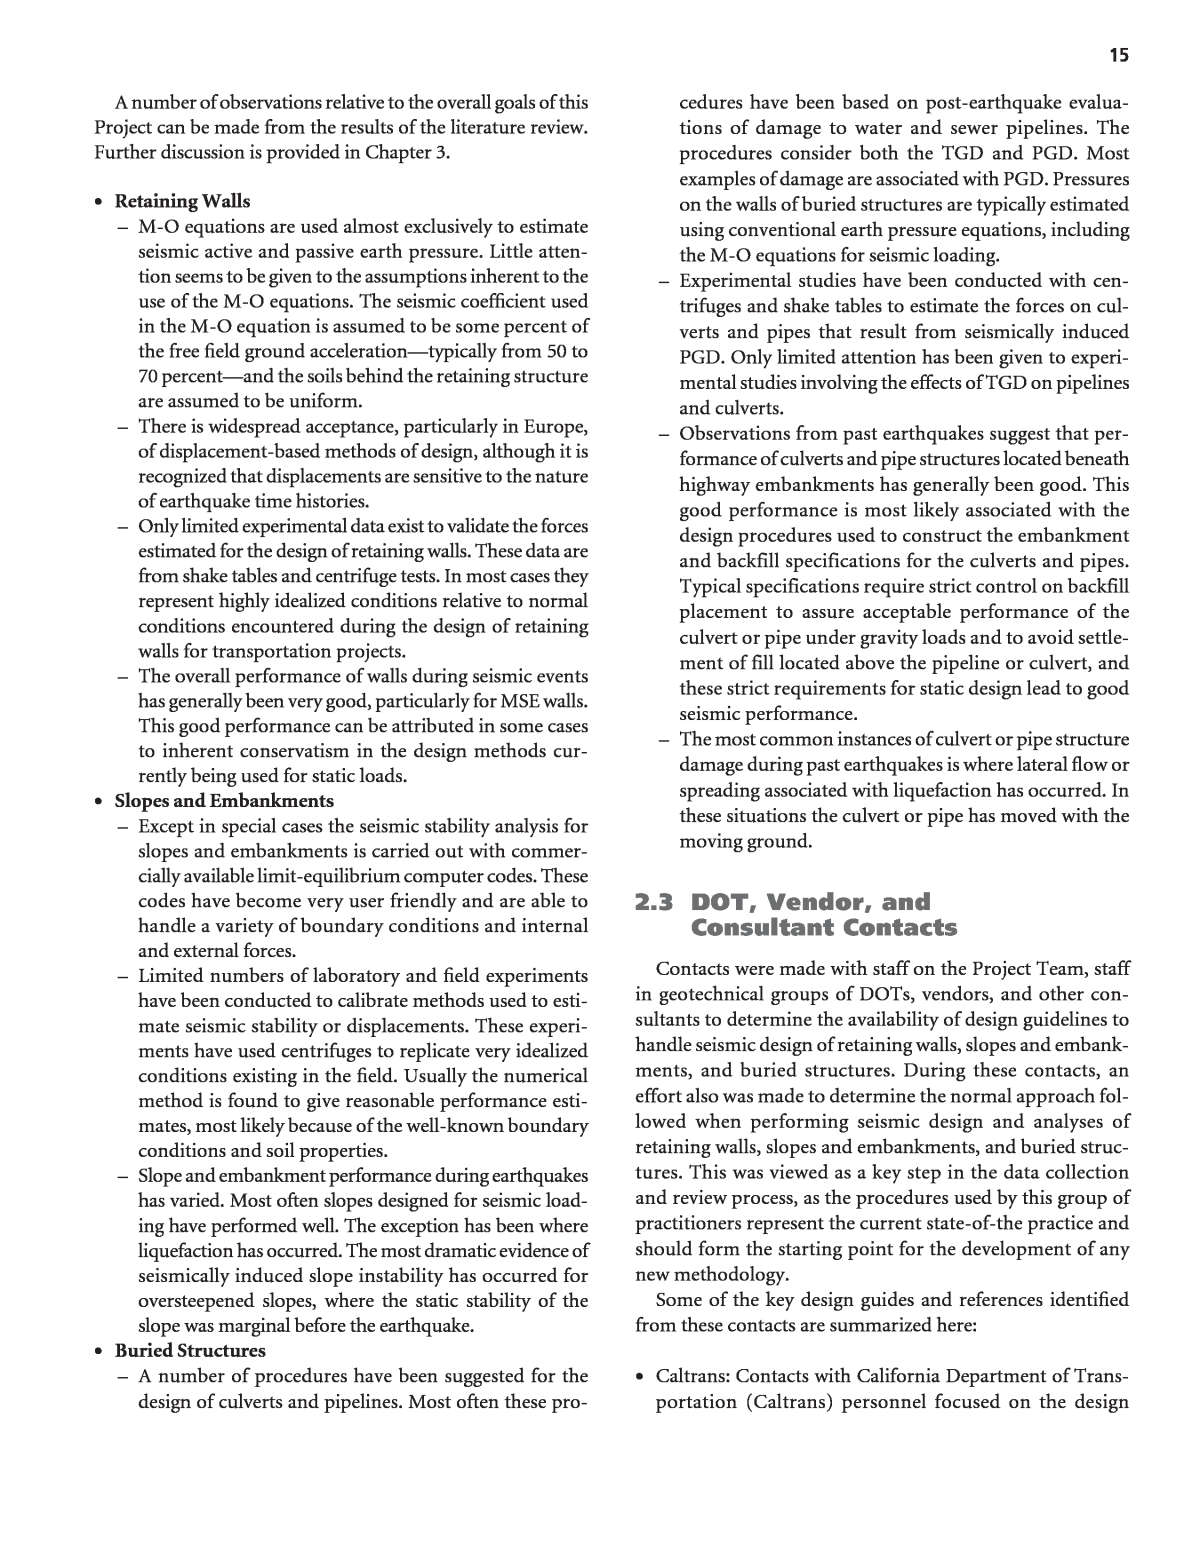 2.3 Discussion, Page 15